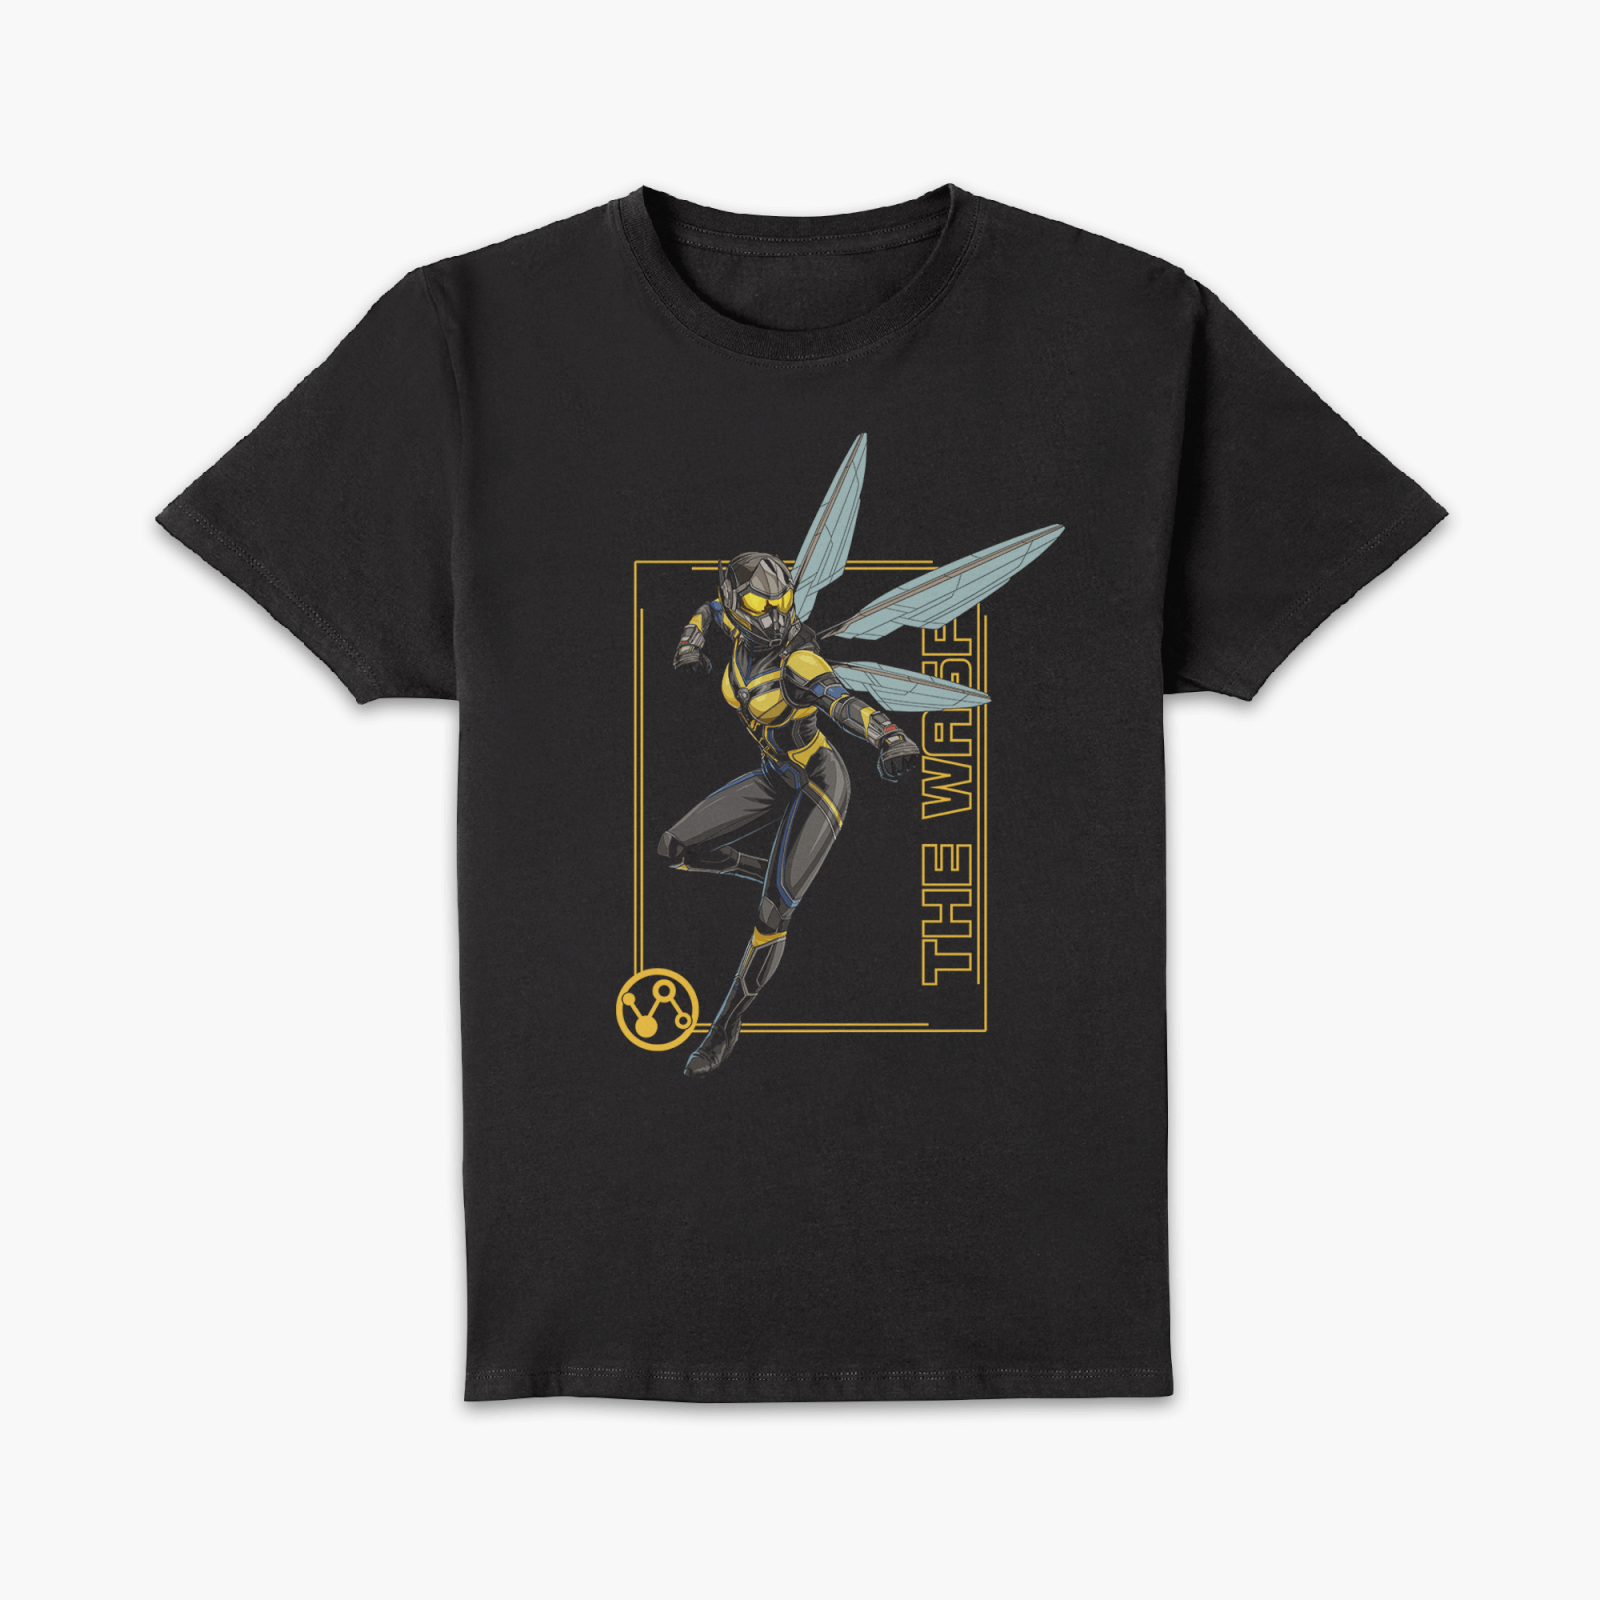 Marvel Ant-Man & The Wasp: Quantumania The Wasp Pose T-Shirt - Black - XS - Noir